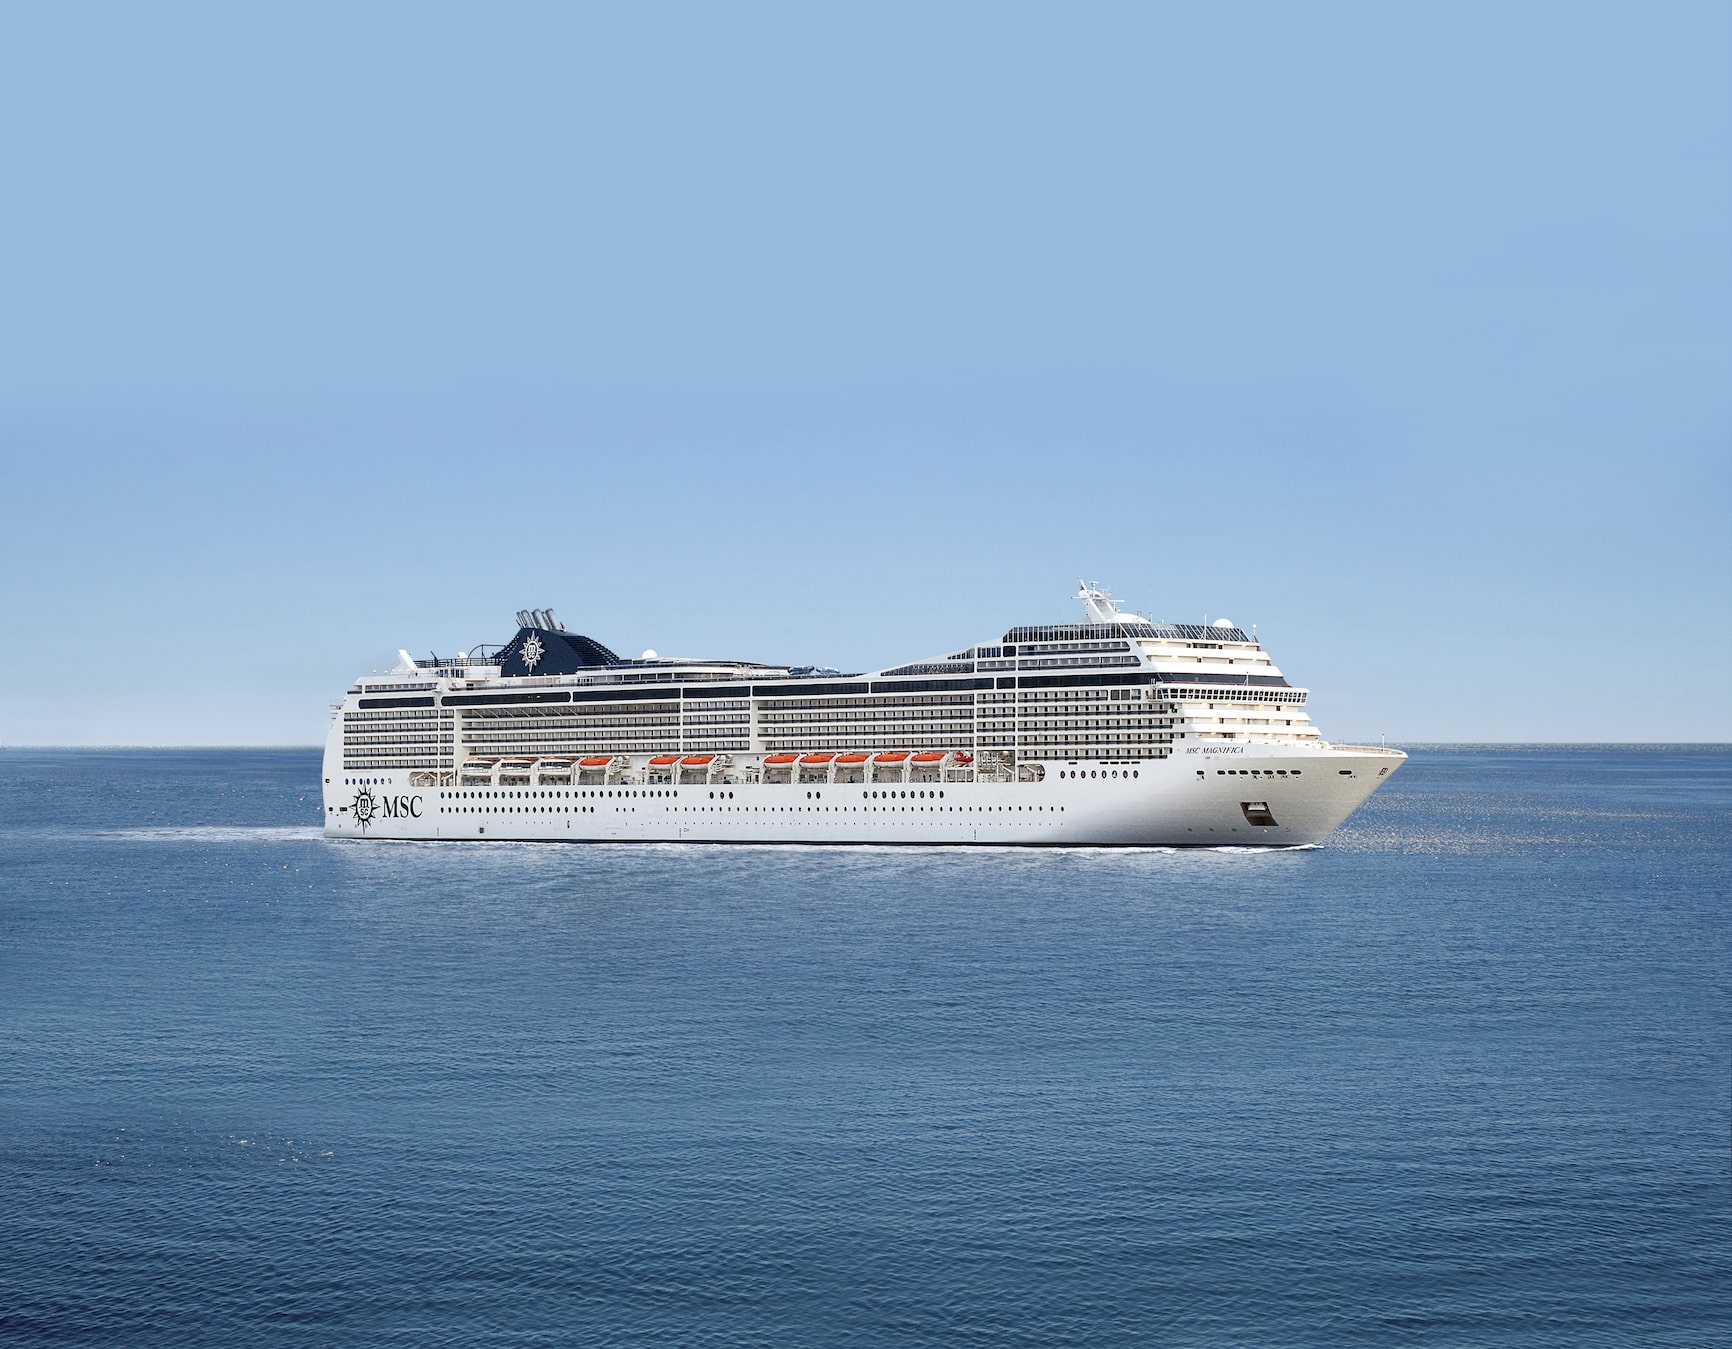 The MSC Magnifica, the cruise ship encompassing the globe, embarking from and returning to Barcelona port